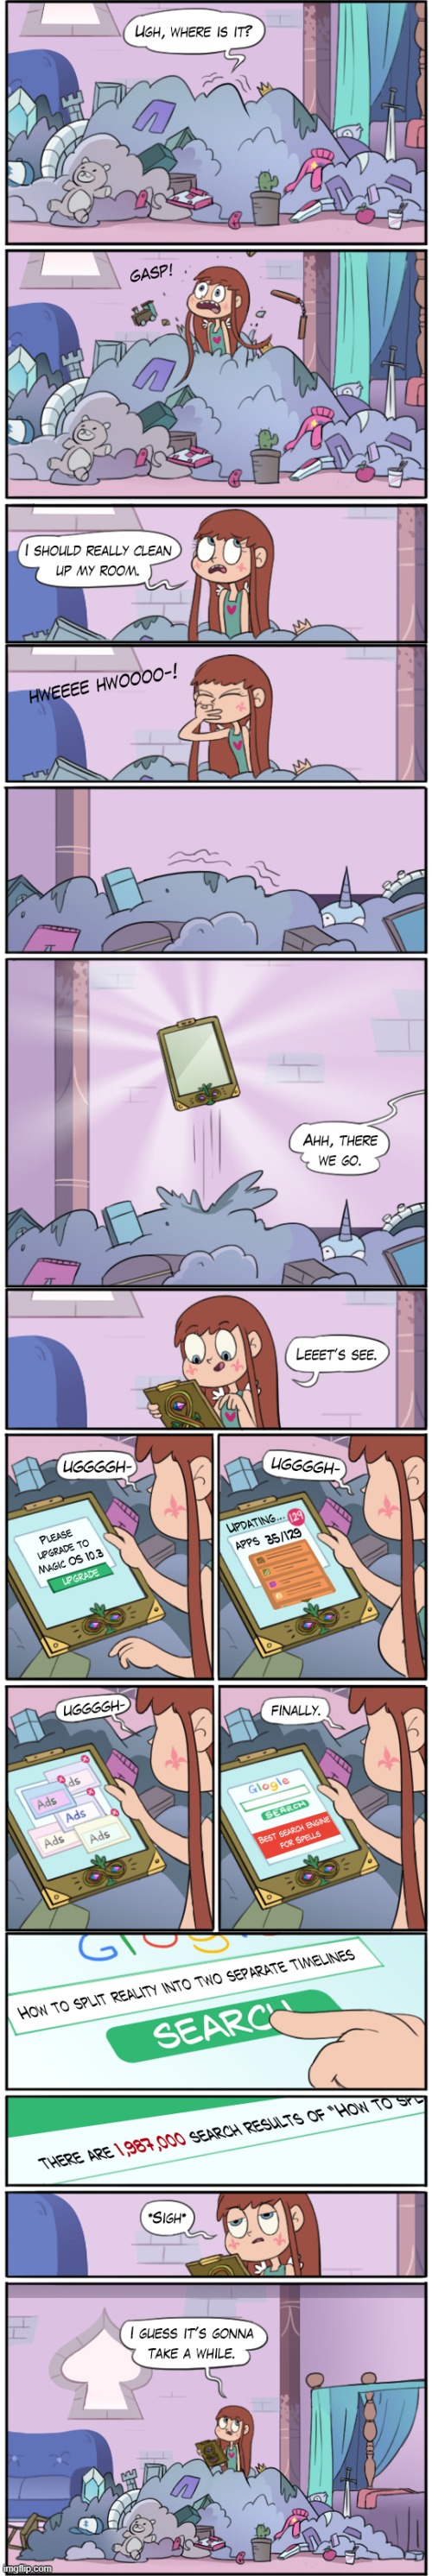 Ship War AU (Part 25) | image tagged in comics/cartoons,star vs the forces of evil,repost | made w/ Imgflip meme maker